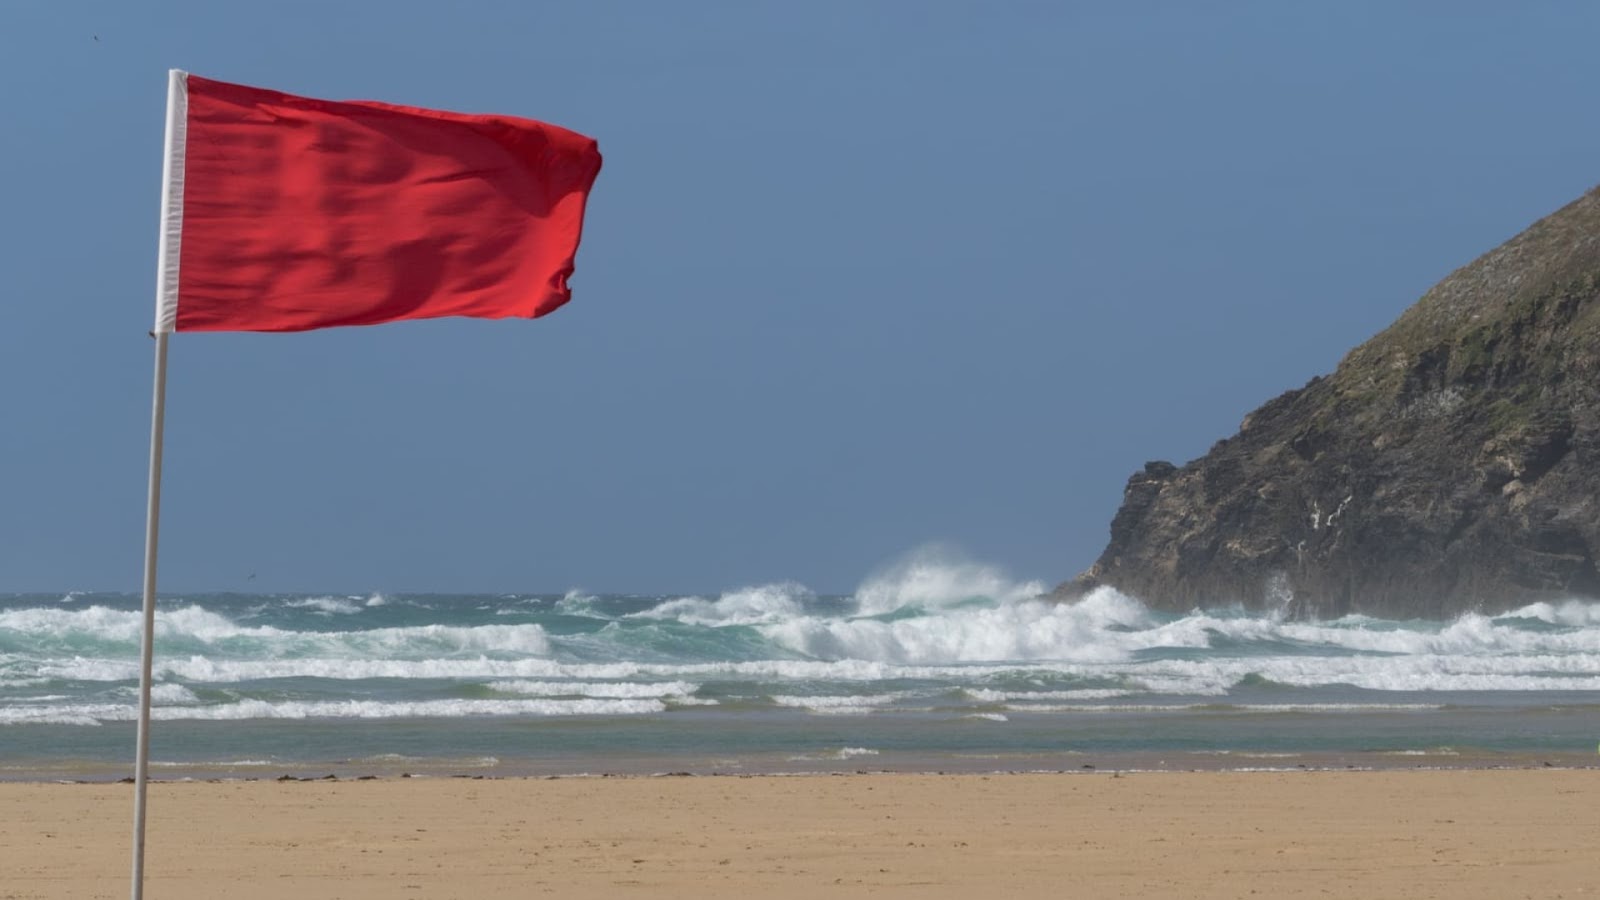 An image of a red safety beach flag